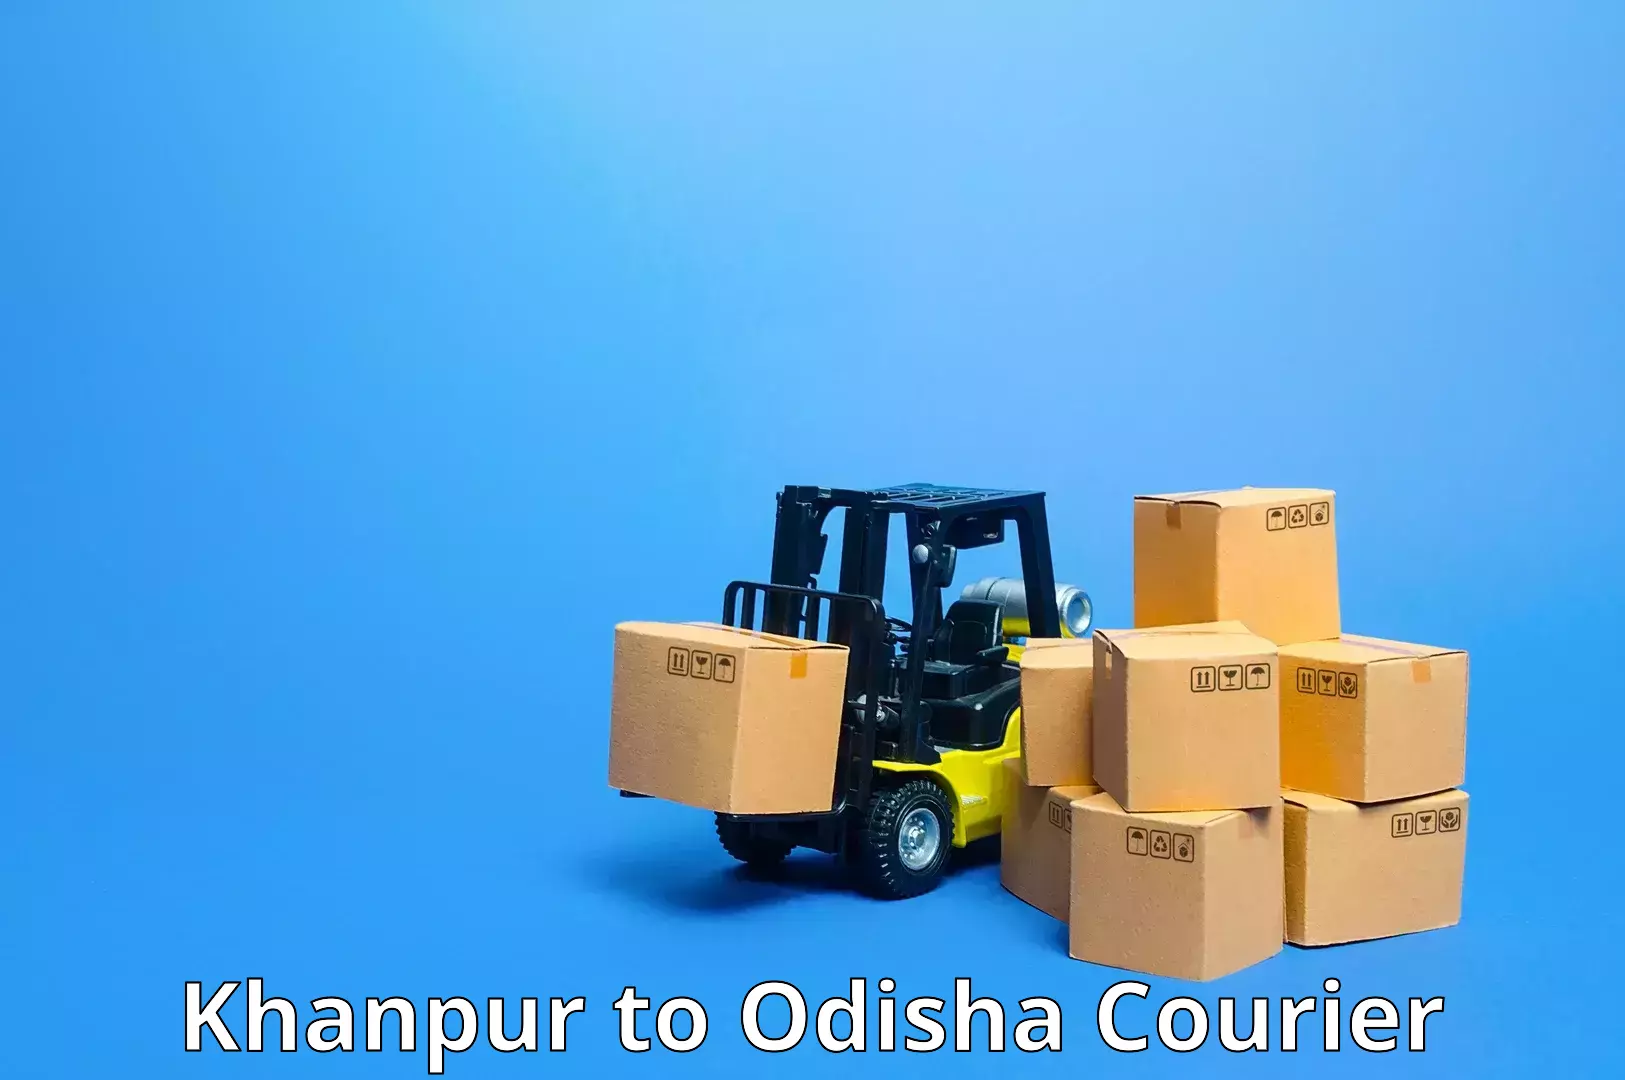 State-of-the-art courier technology Khanpur to Odisha